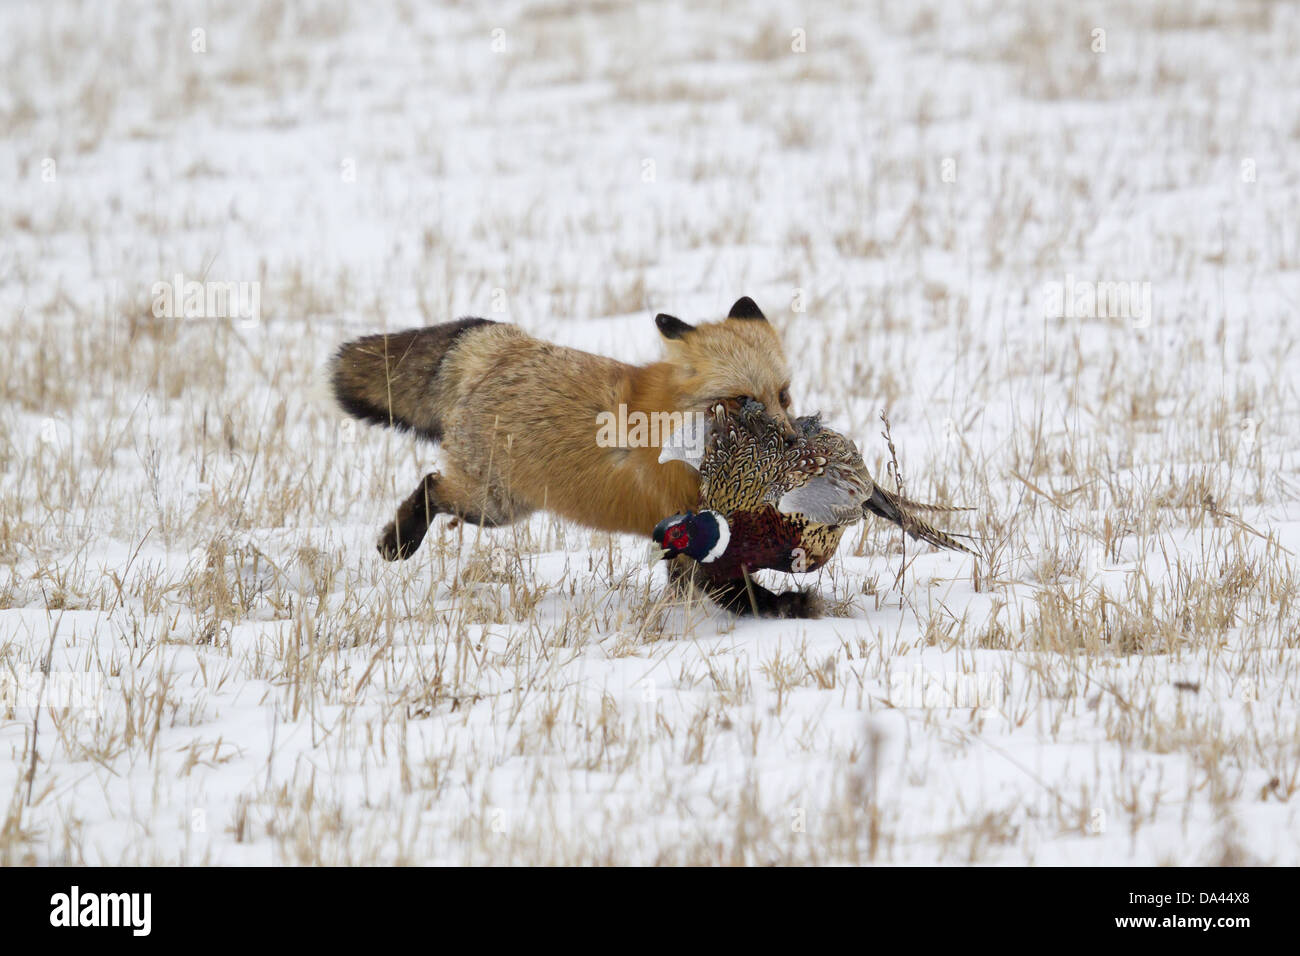 American Red Fox (Vulpes vulpes fulva) adult female running in snow covered field with Common Pheasant (Phasianus colchicus) Stock Photo